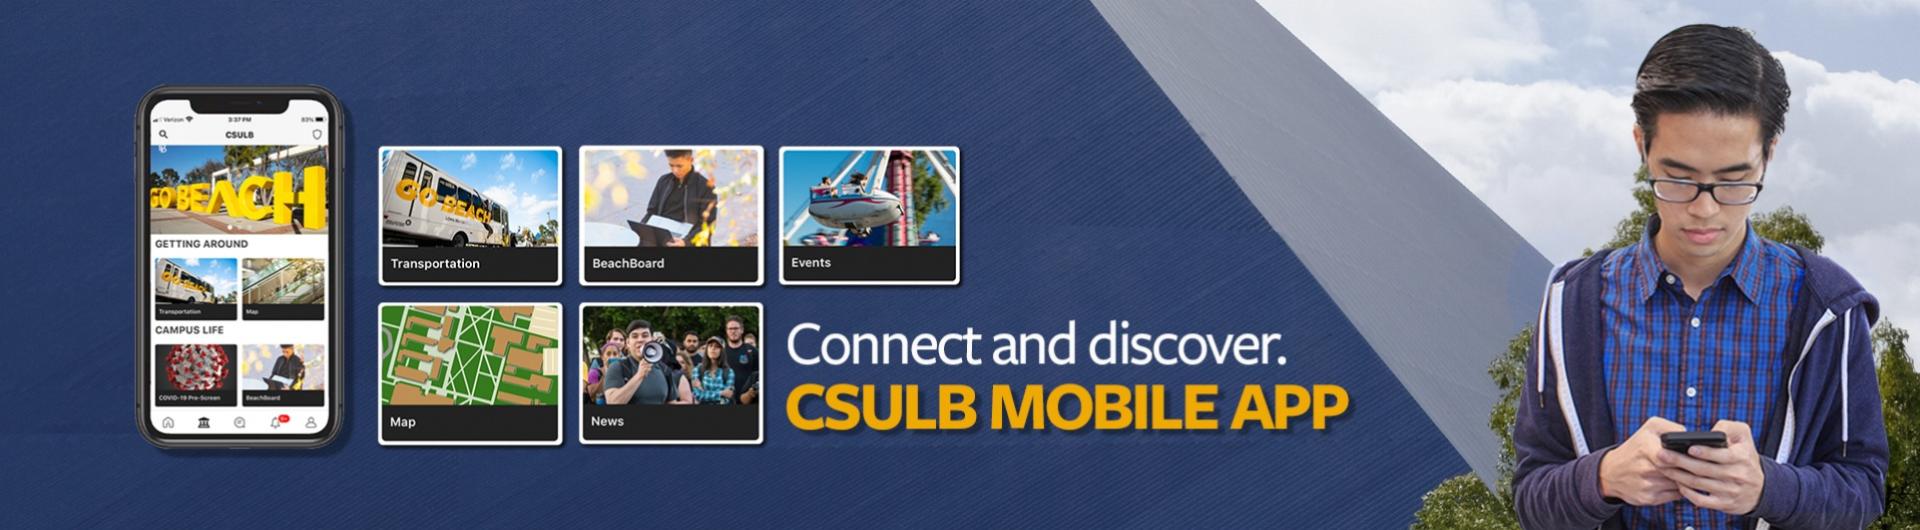 connect and discover csulb mobile app